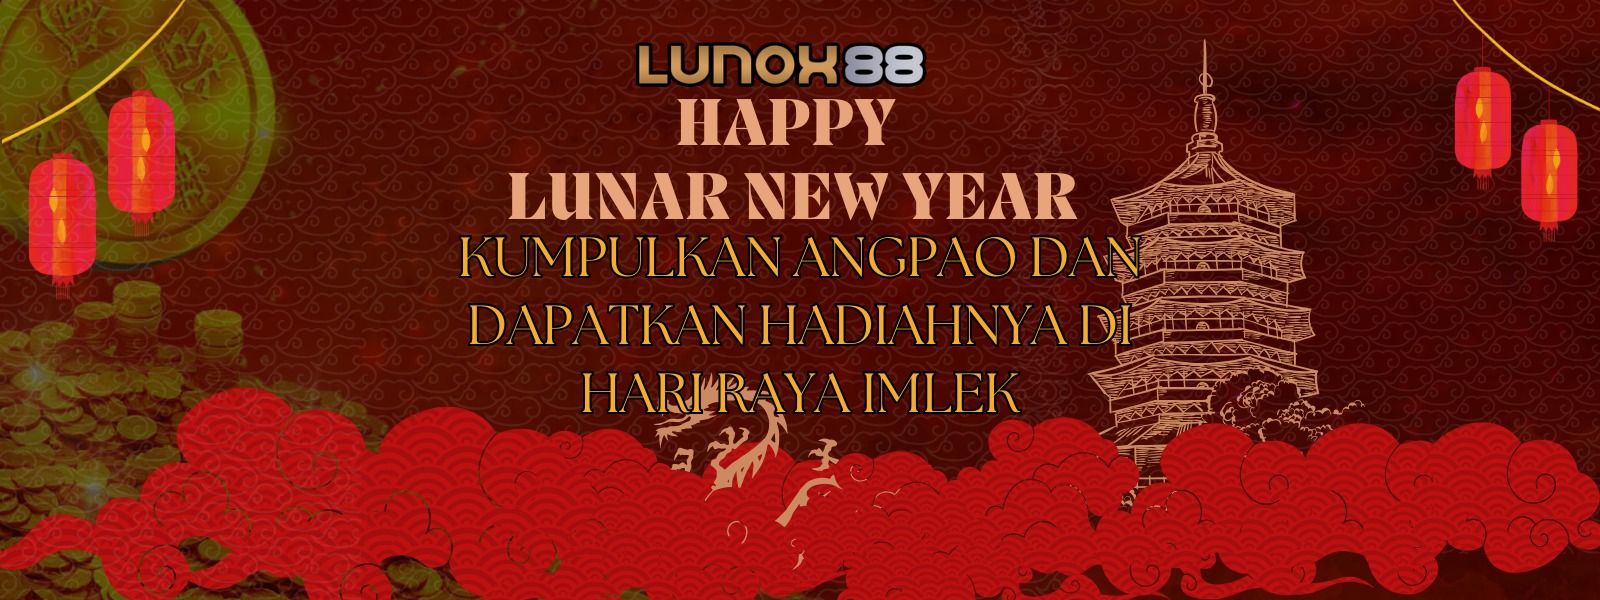 EVENT HAPPY NEW LUNAR